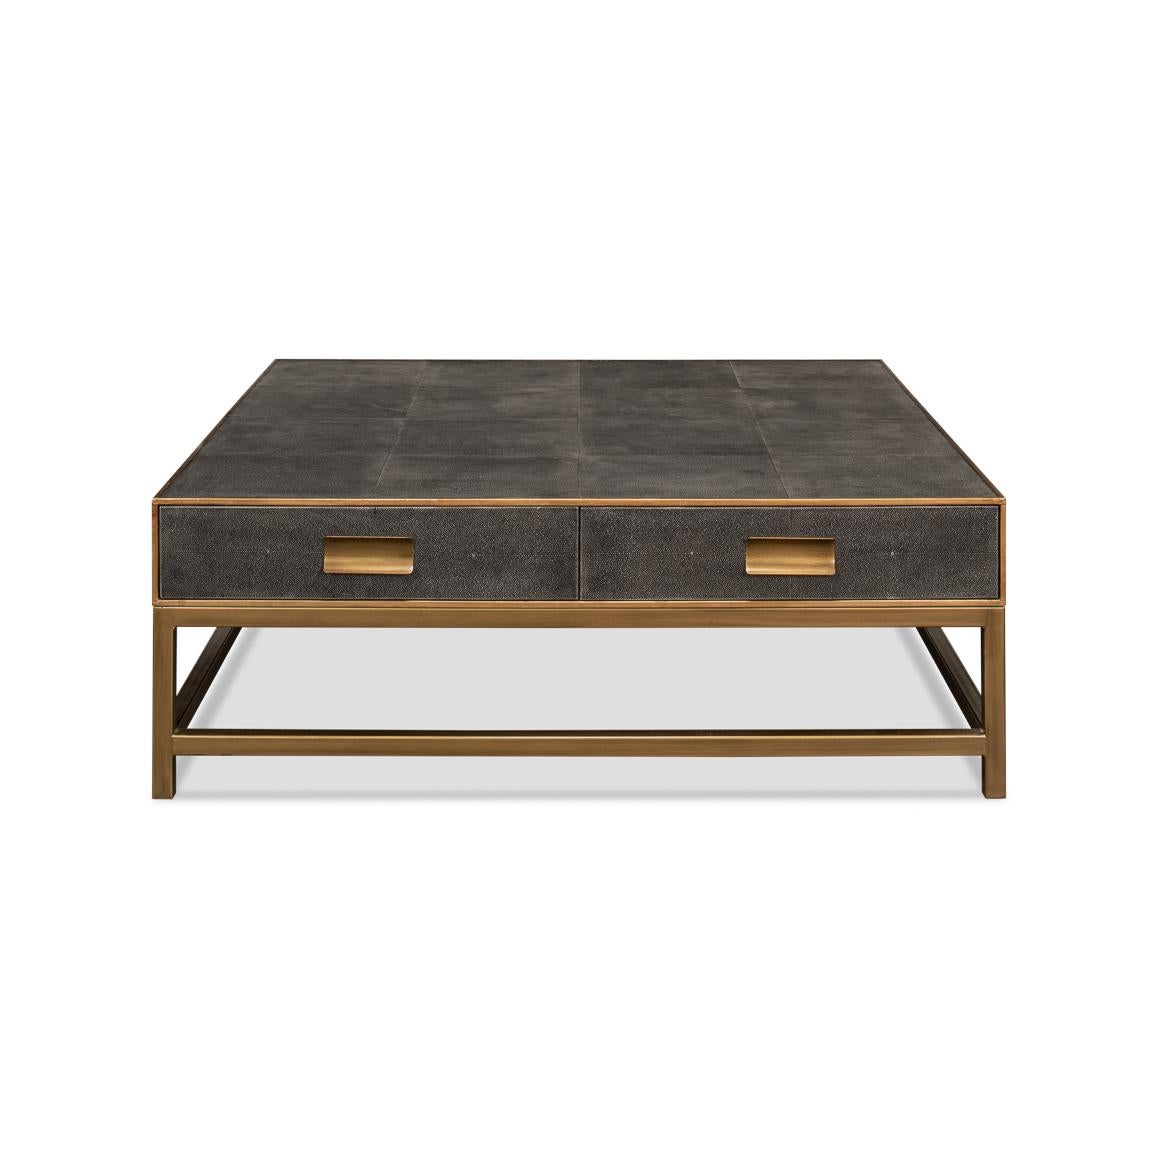 Crafted from wood with a shagreen embossed leather wrapped top, this square coffee table is finished with gold trim and hardware. With two drawers and raised on cube-form base with stretchers. 

The low-profile design makes it ideal for a functional